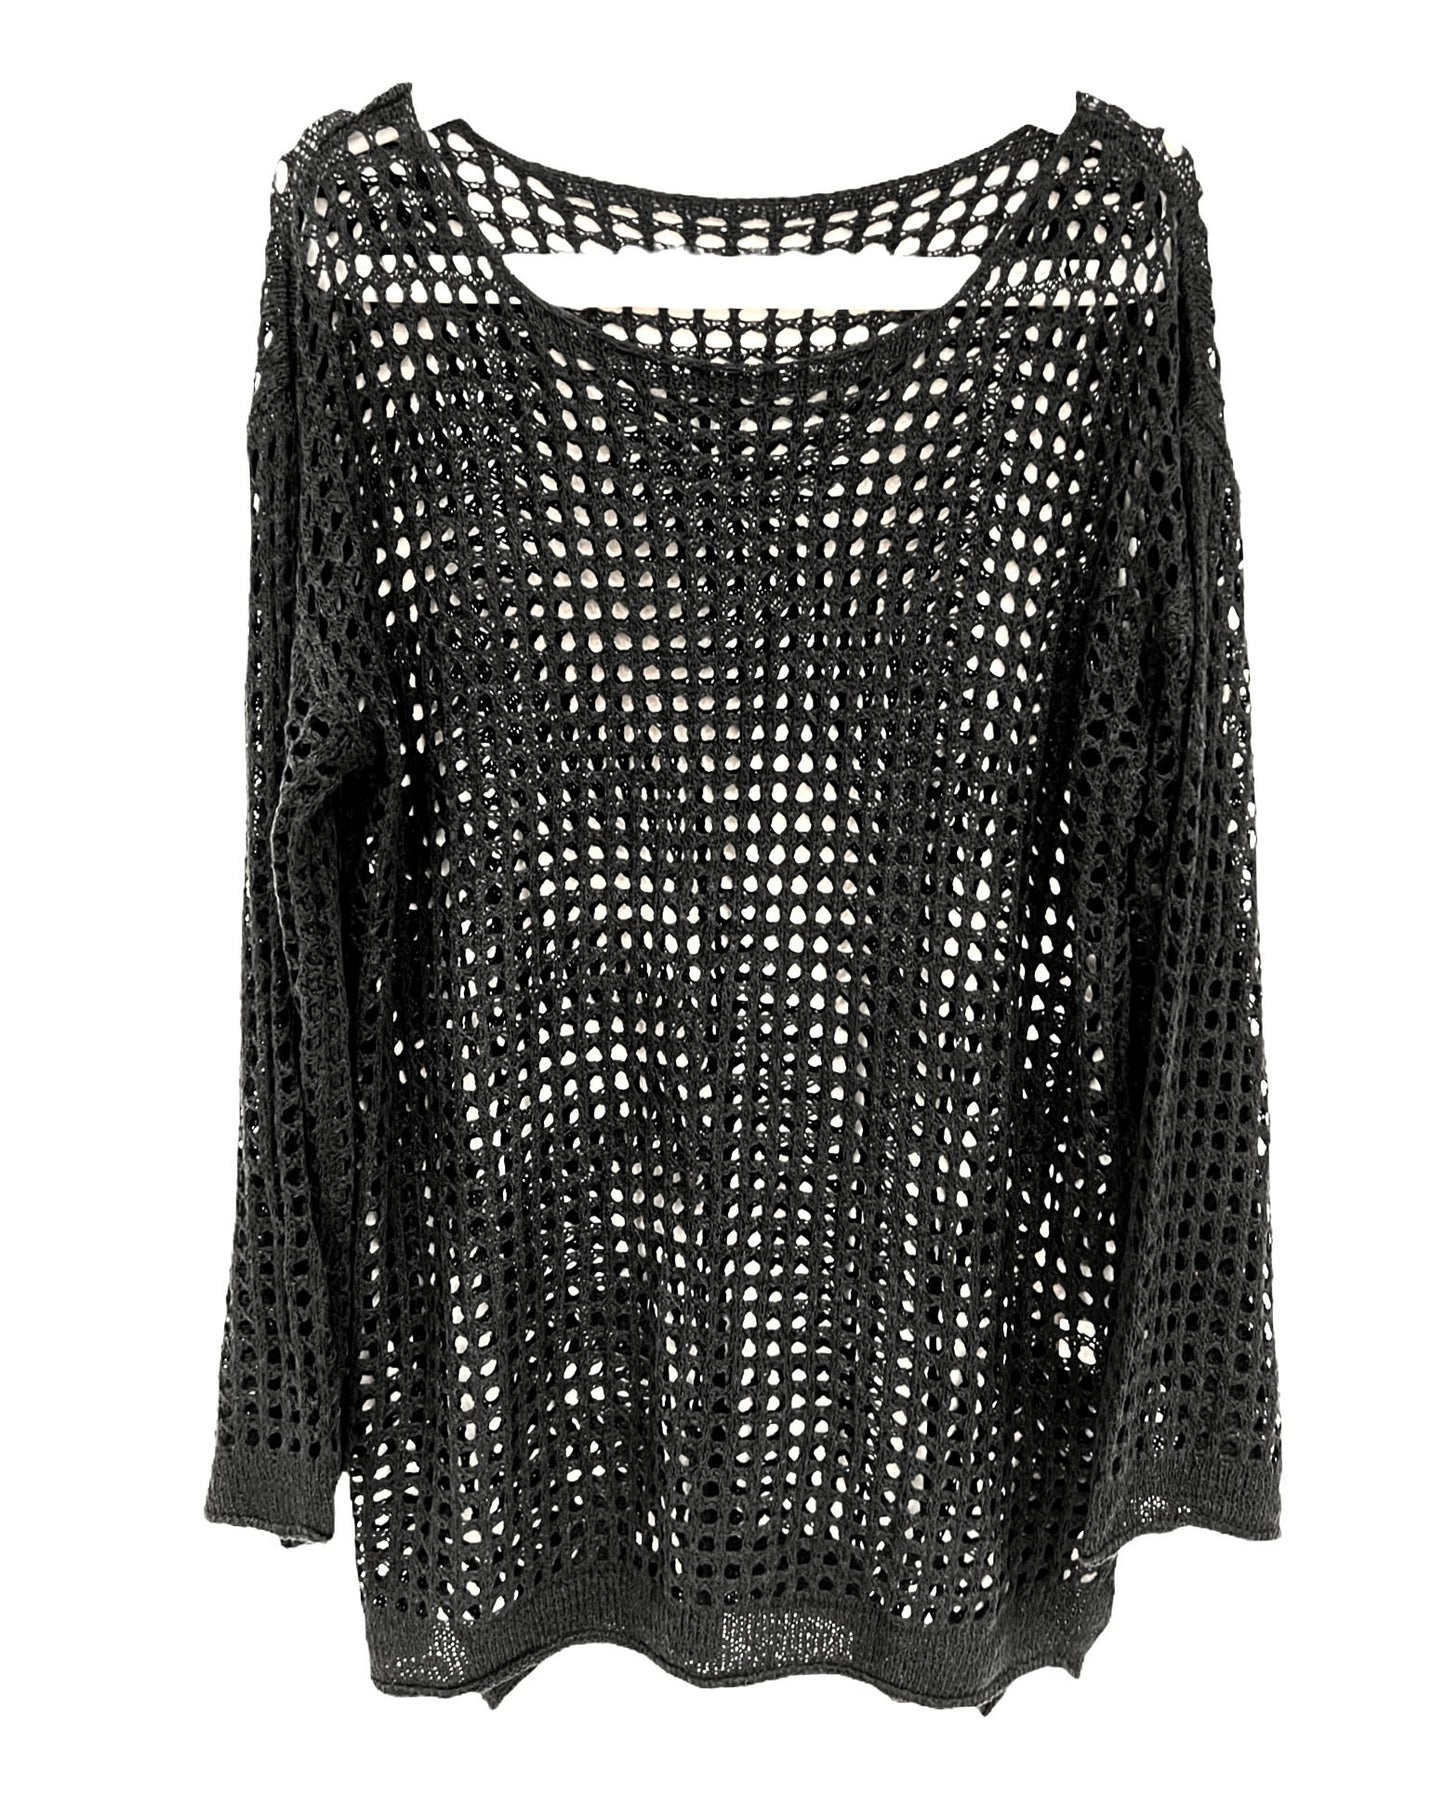 black net knitted cover up top *pre-order*